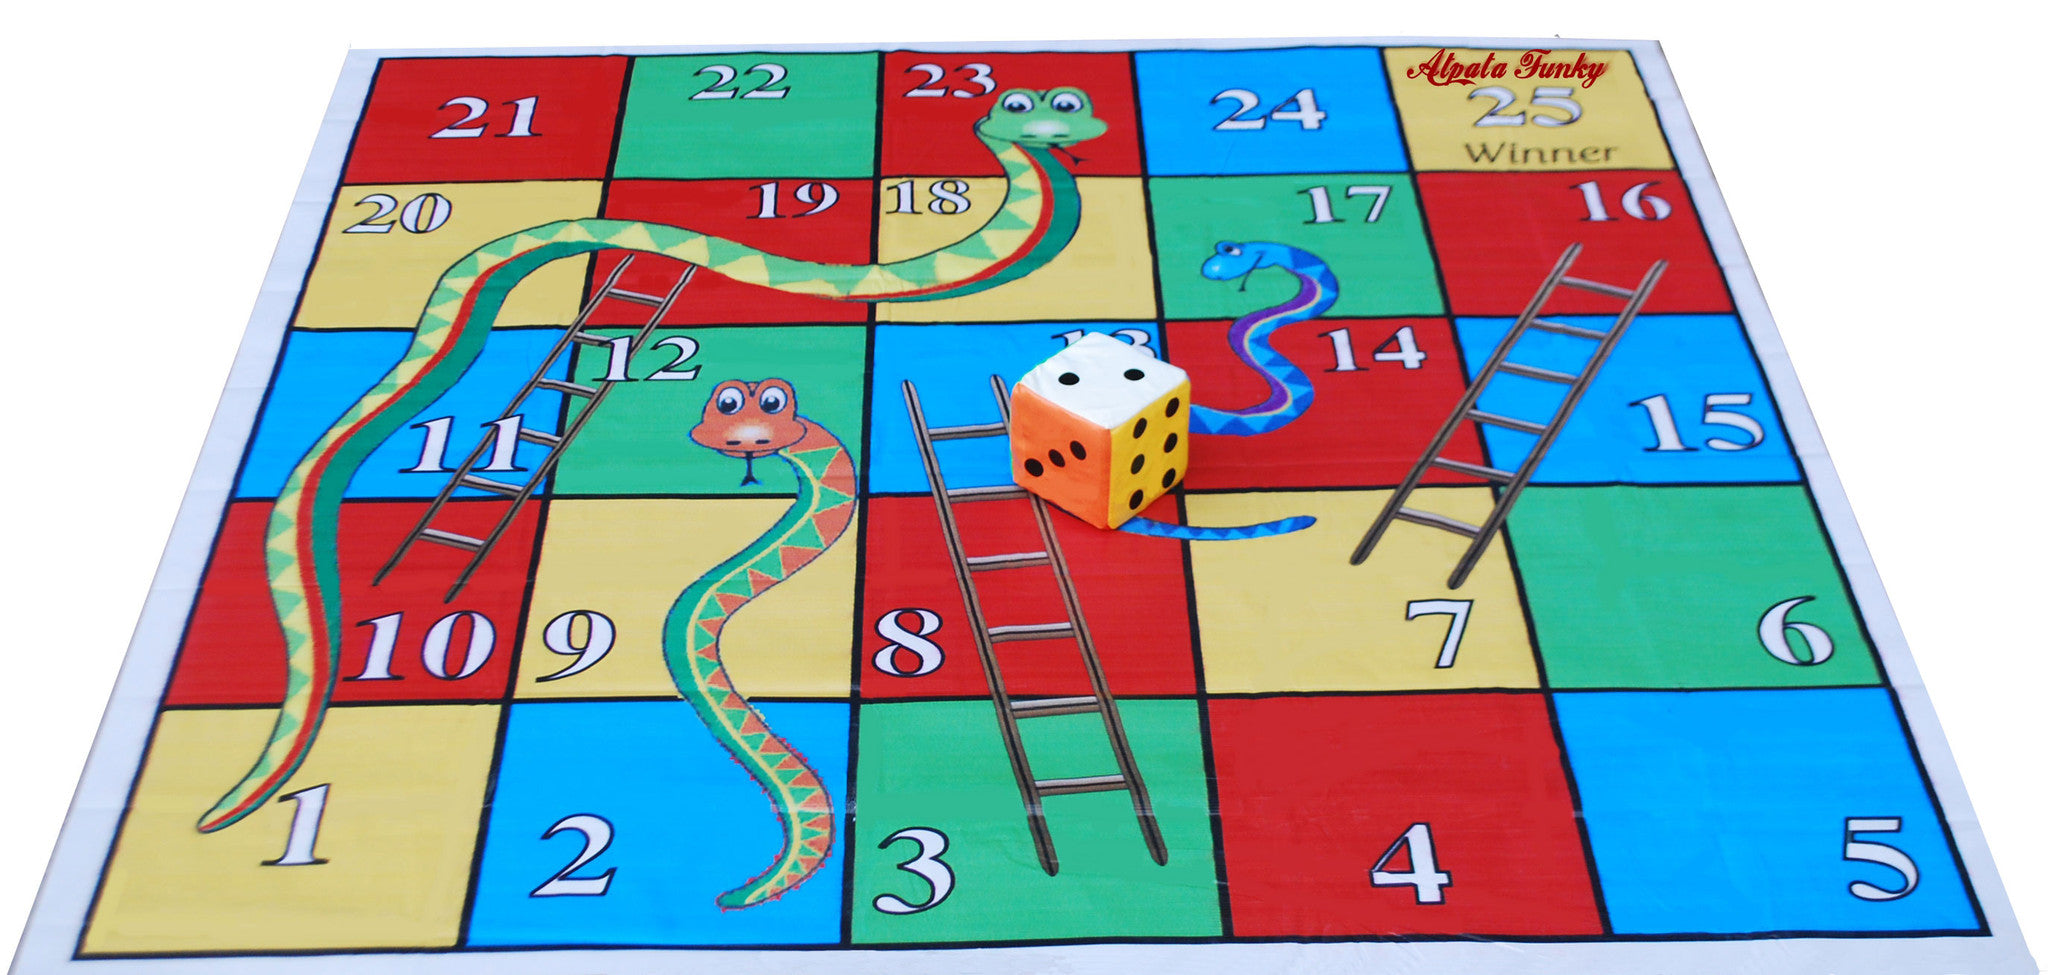 5x5 Ft Snakes Ladders Floor Mat With 8 Inch Dice Atpata Funky